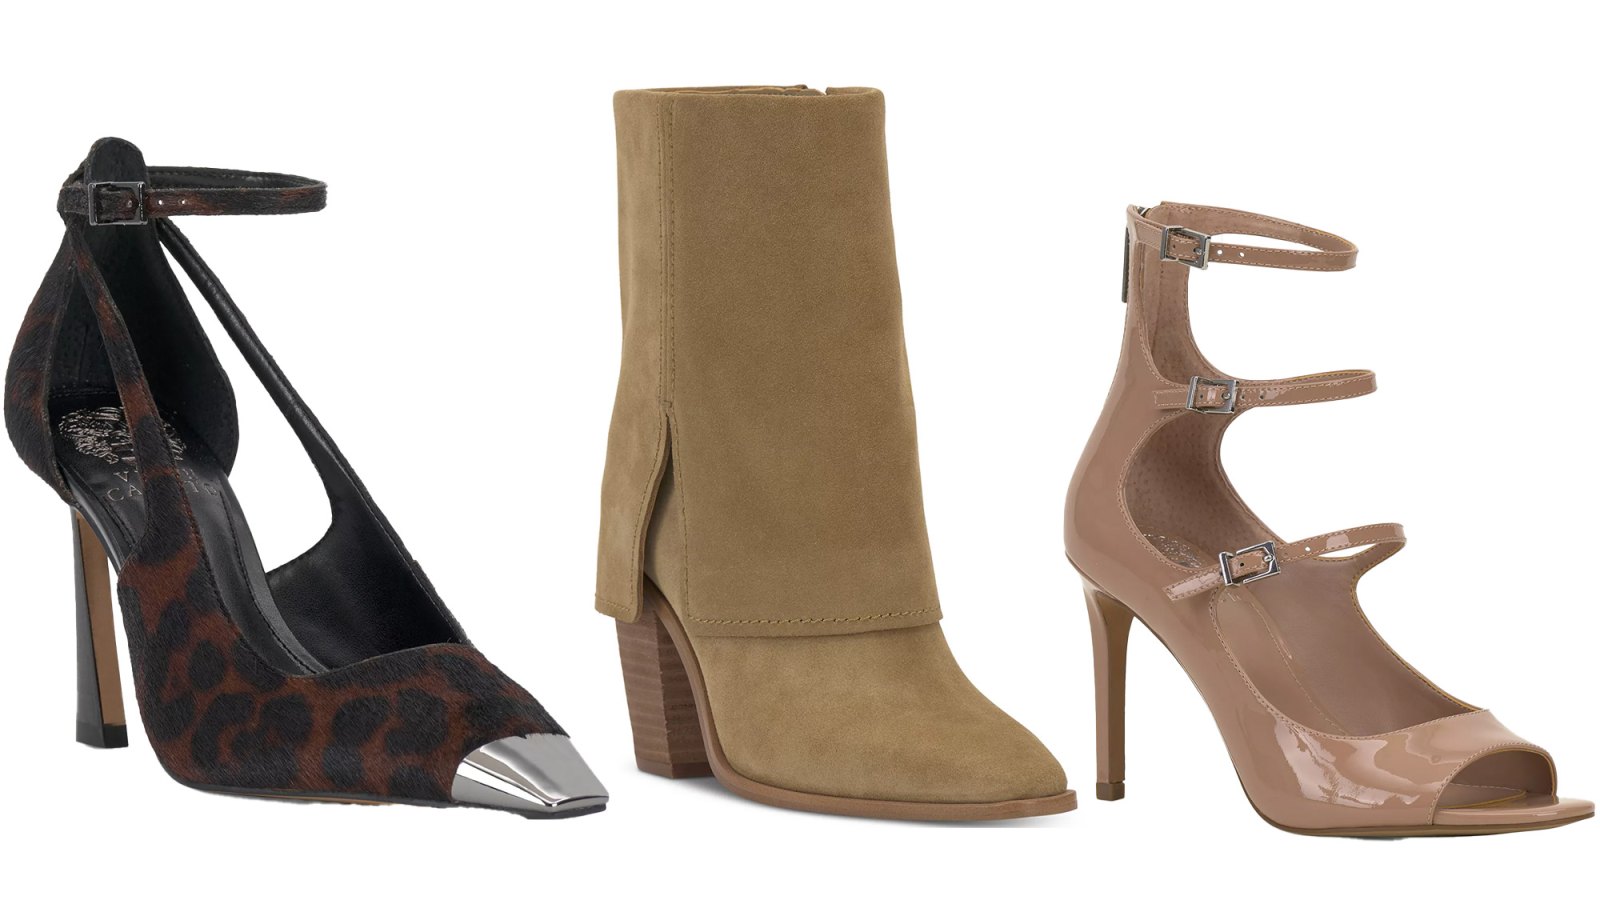 8 Vince Camuto Shoe Deals to Shop at Macy's — Up to 80% Off